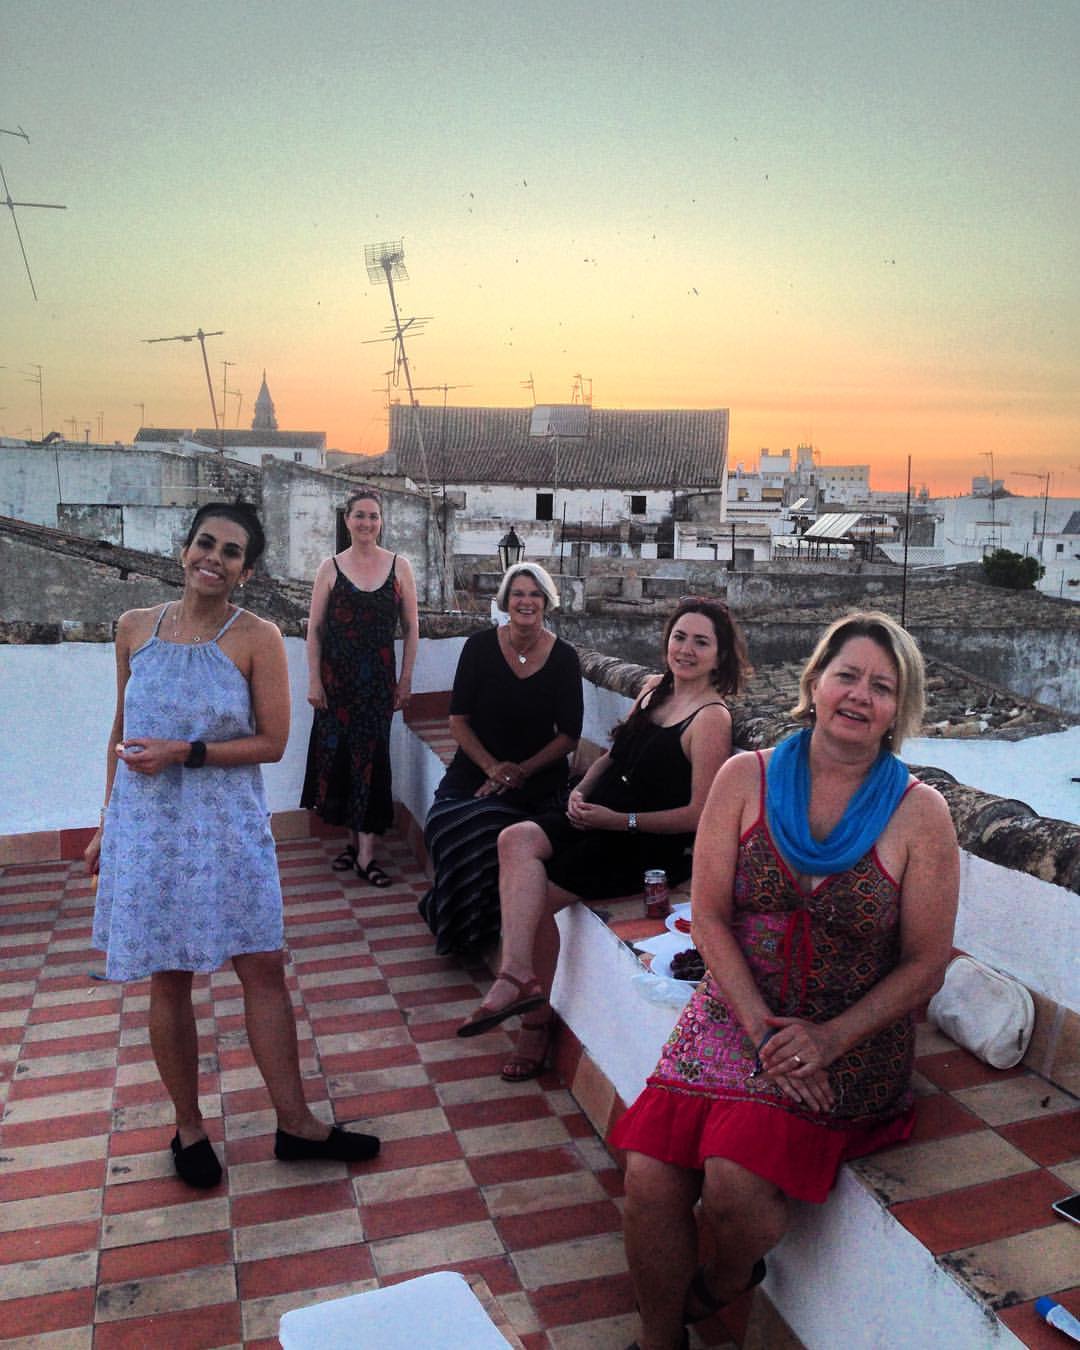 summer ladies on the rooftop at sunset.jpg